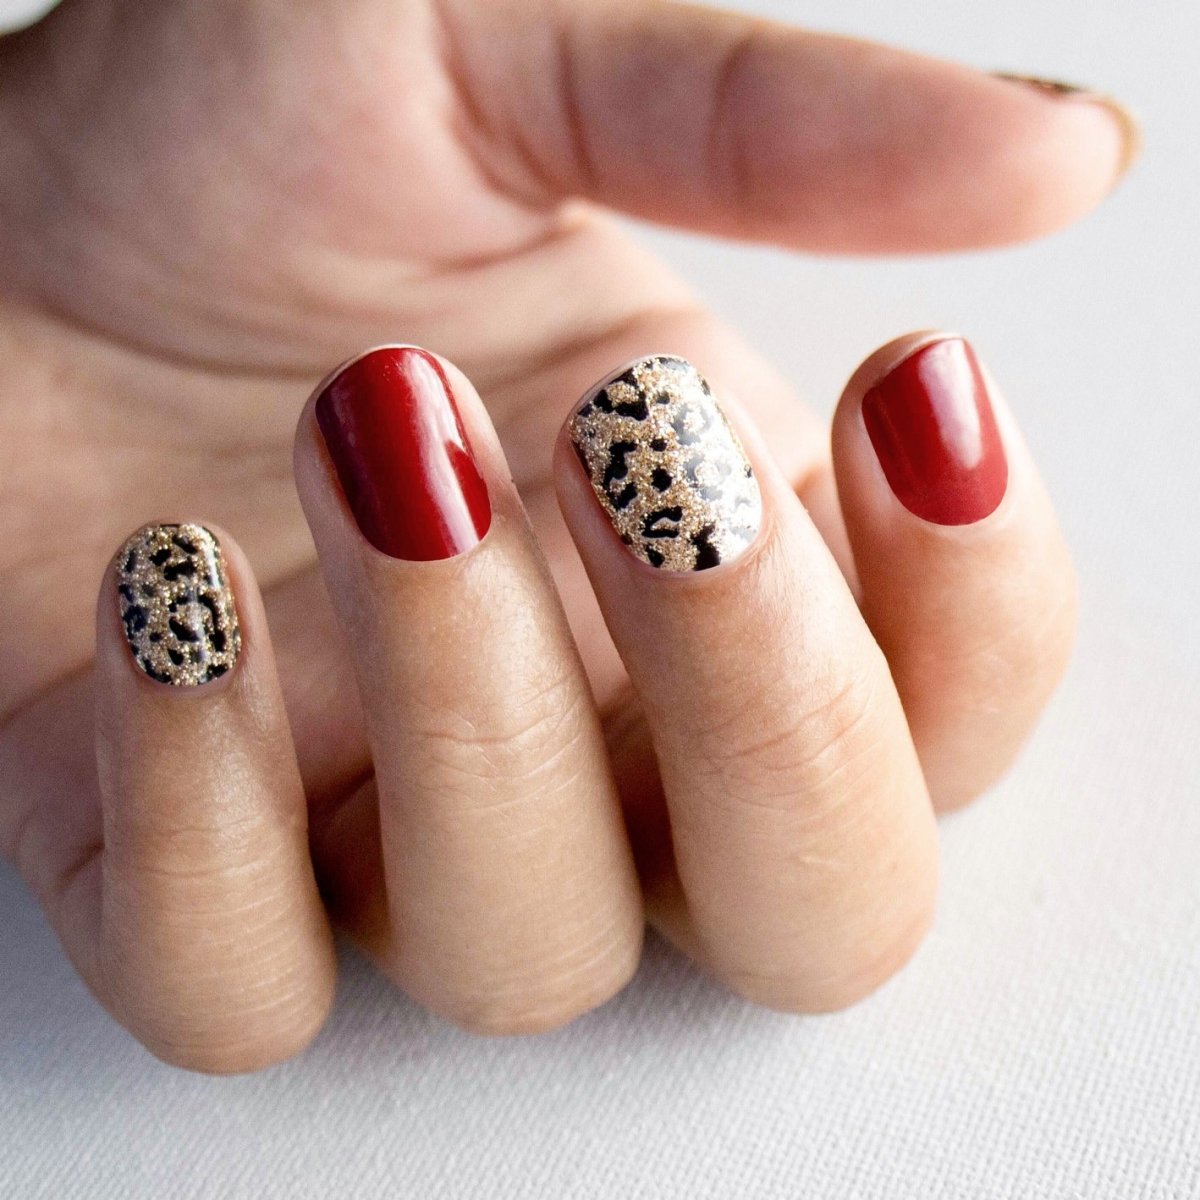 Classic Red Mixed with Leopard Print Combo Nail Wraps – Pretty Fab Nails